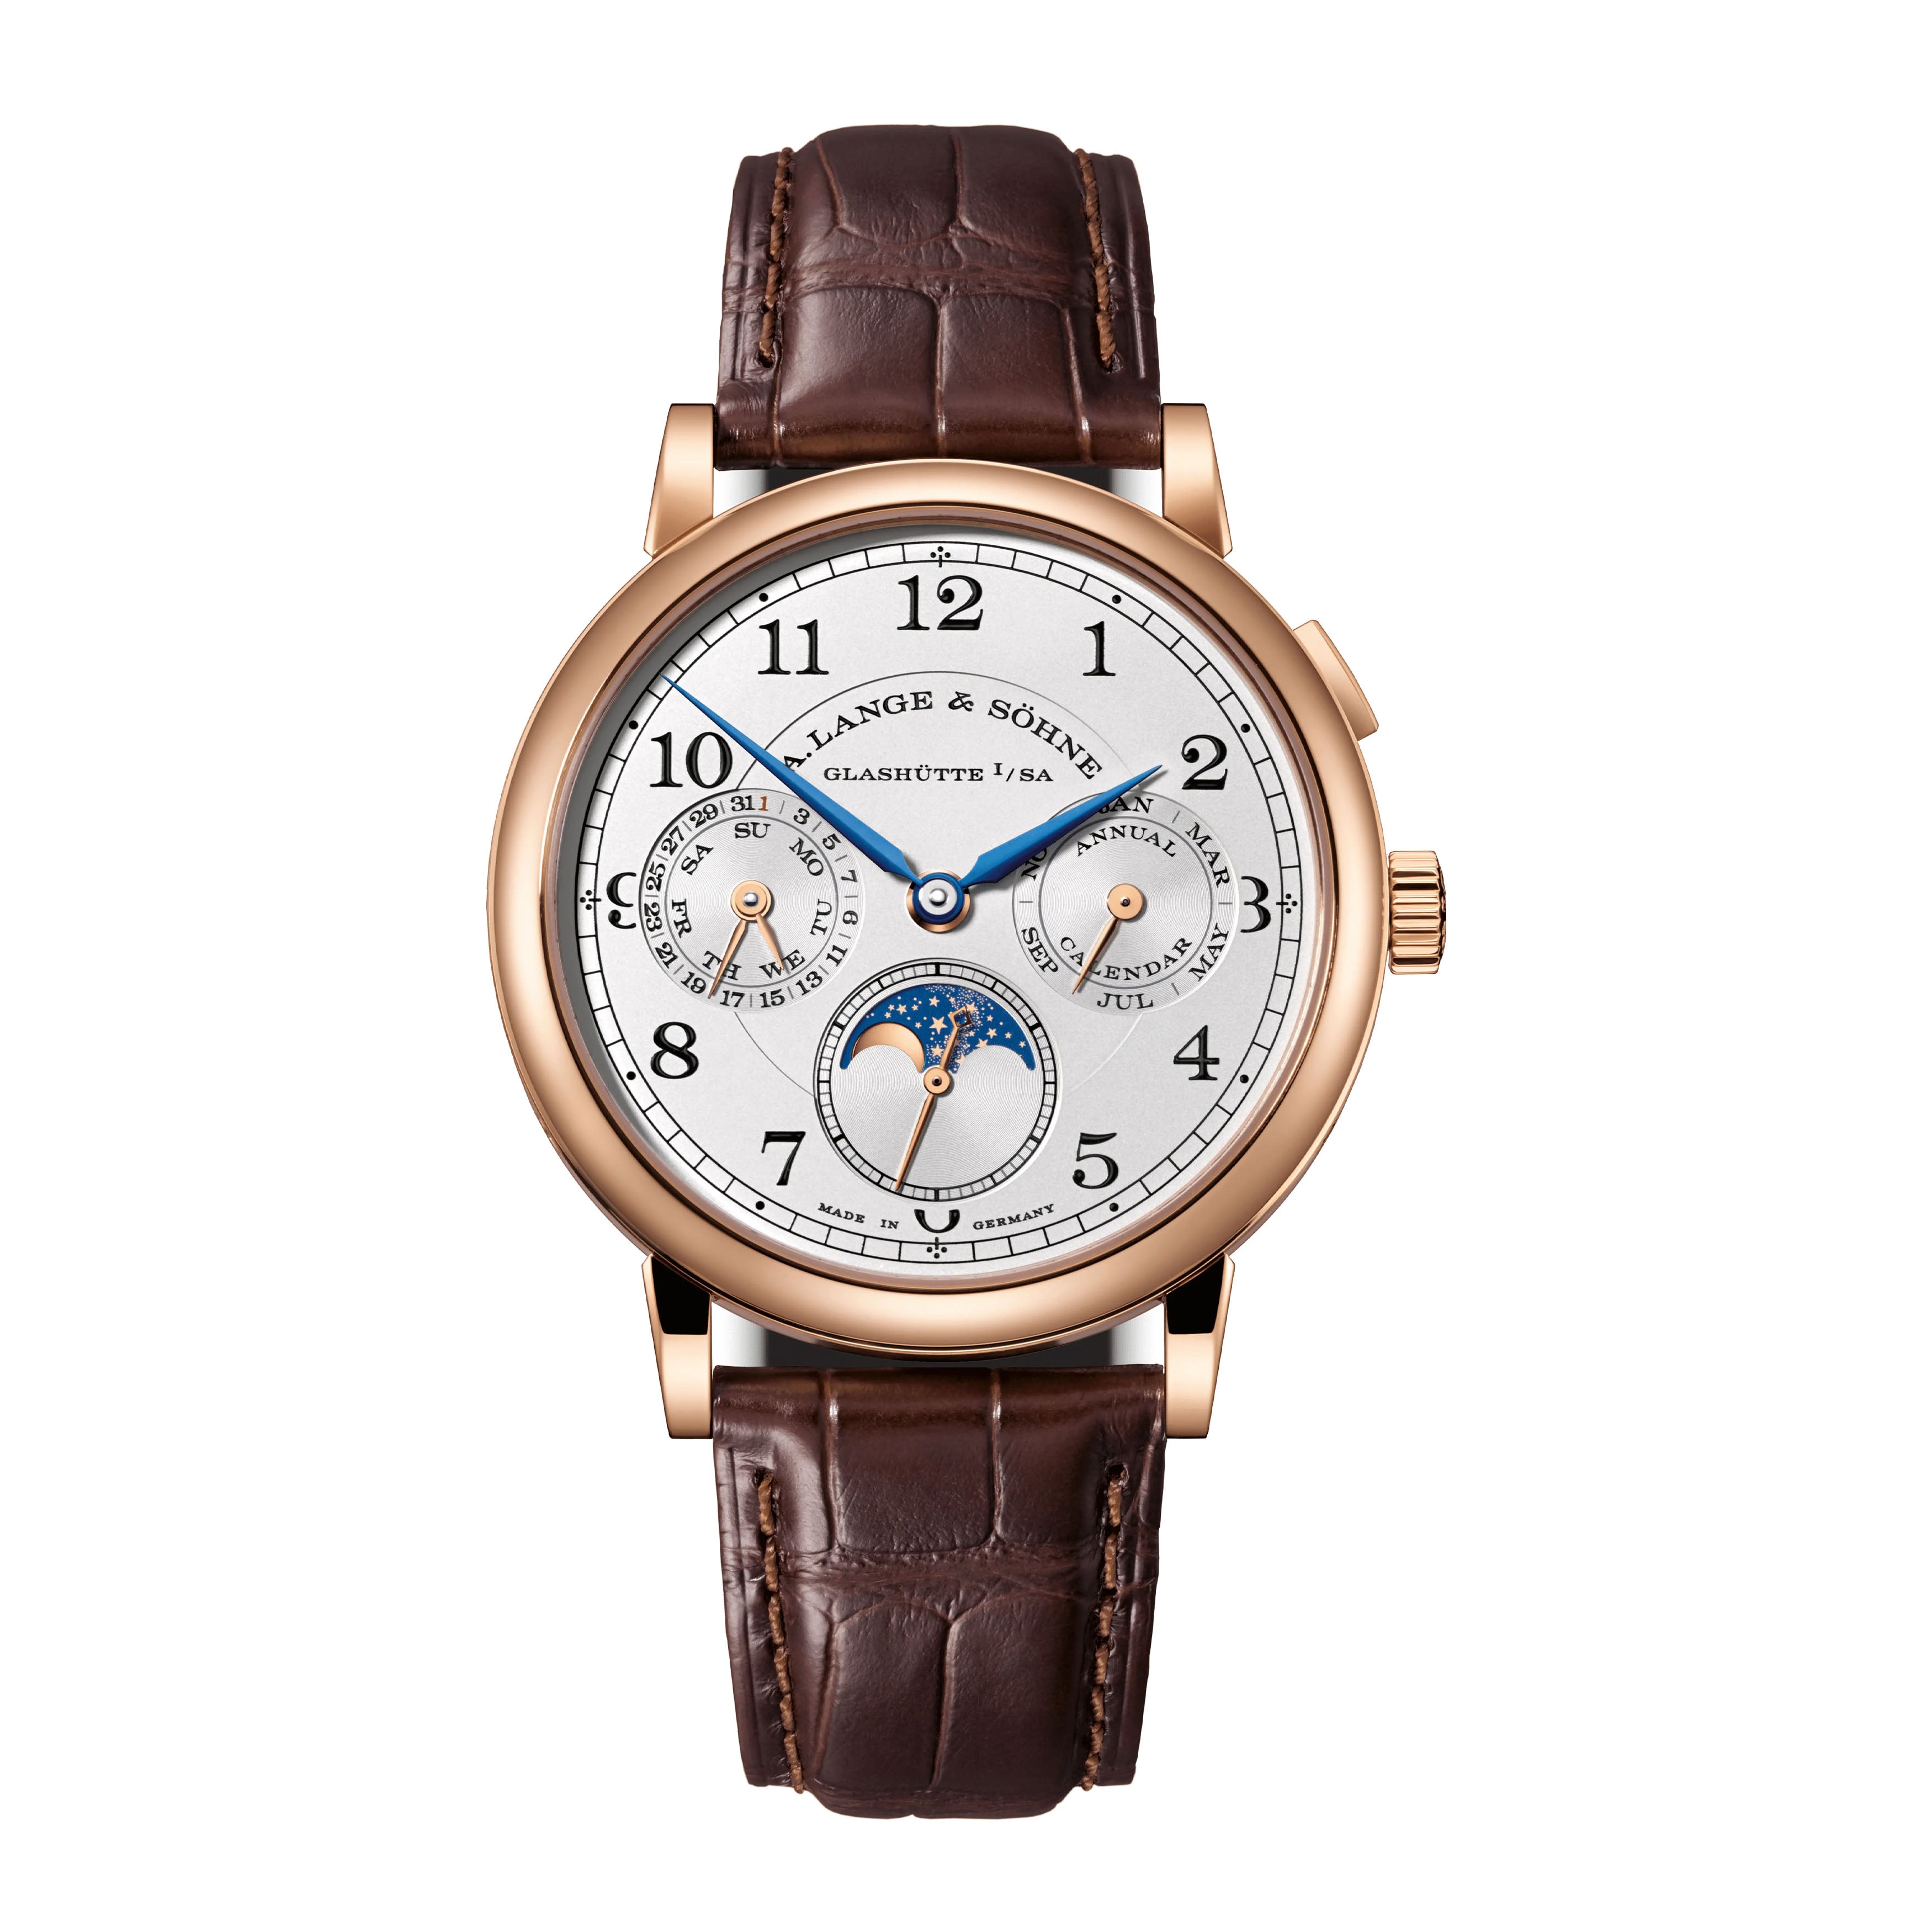 A.Lange & Sohne 1815 Annual Calendar Moon Phase Watch, 40mm Silver Dial, 238.032